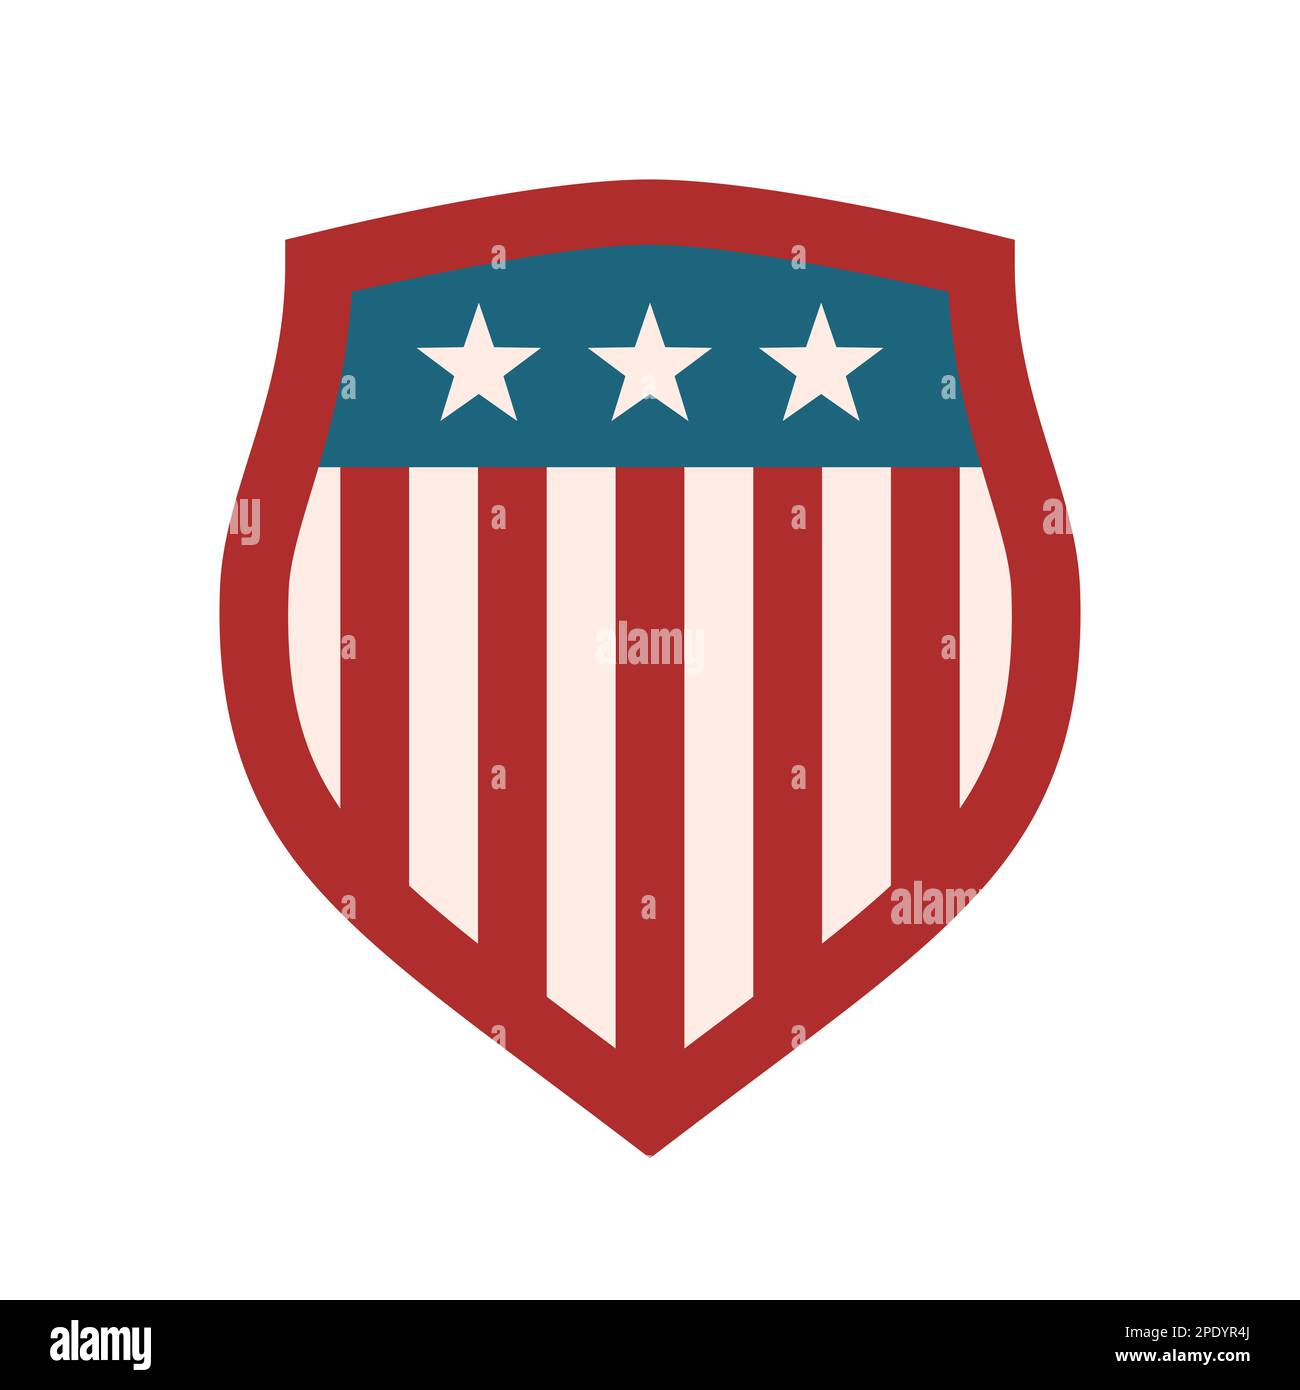 American shield symbol. Sport team emblem. United States of America flag theme. Red, blue, white patriotic colors. USA sign with stars and stripes. Stock Vector